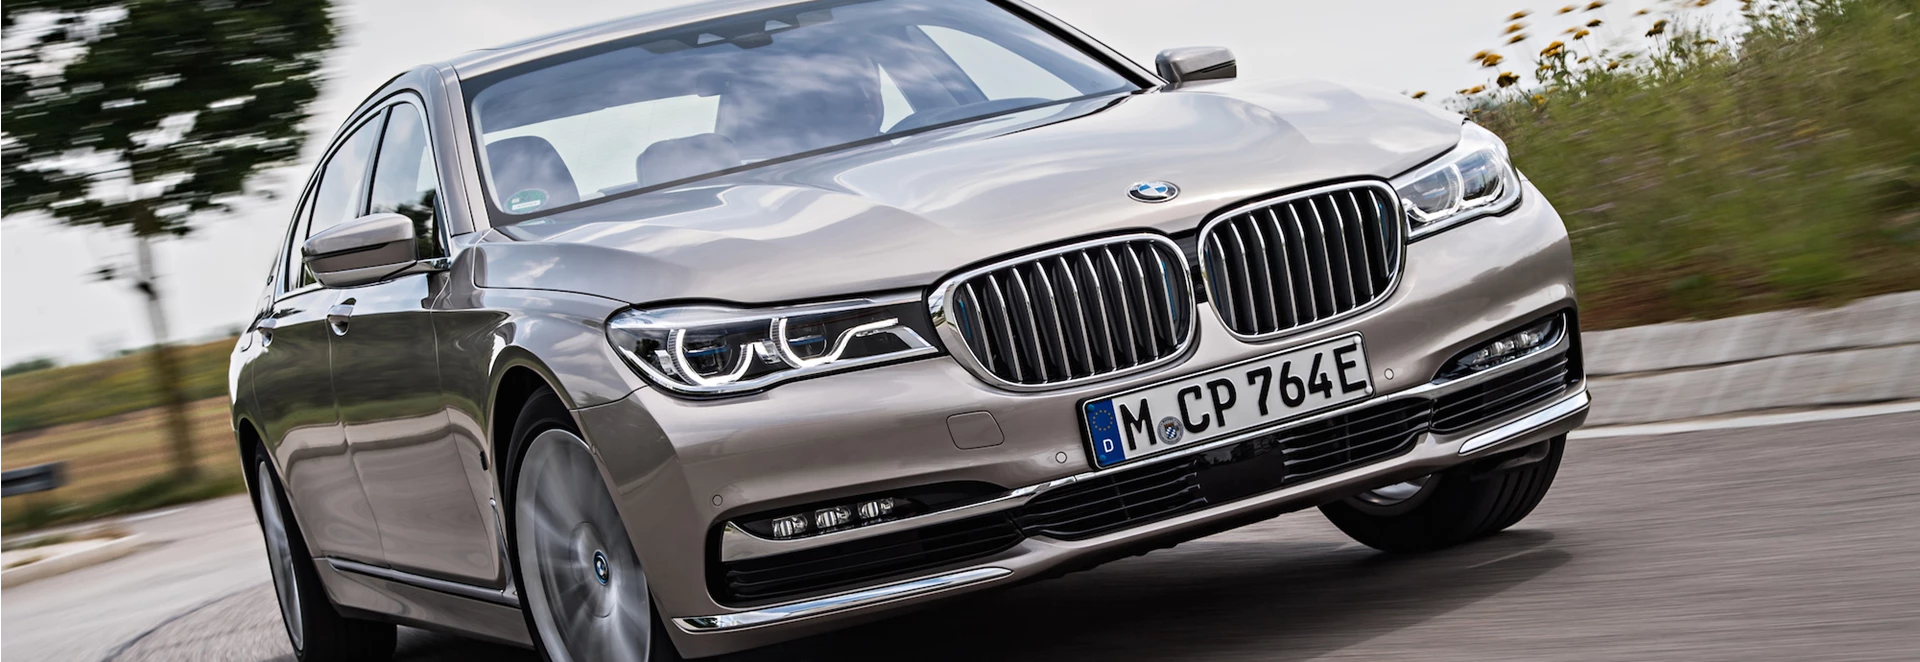 BMW sales and profits hit record levels in 2018